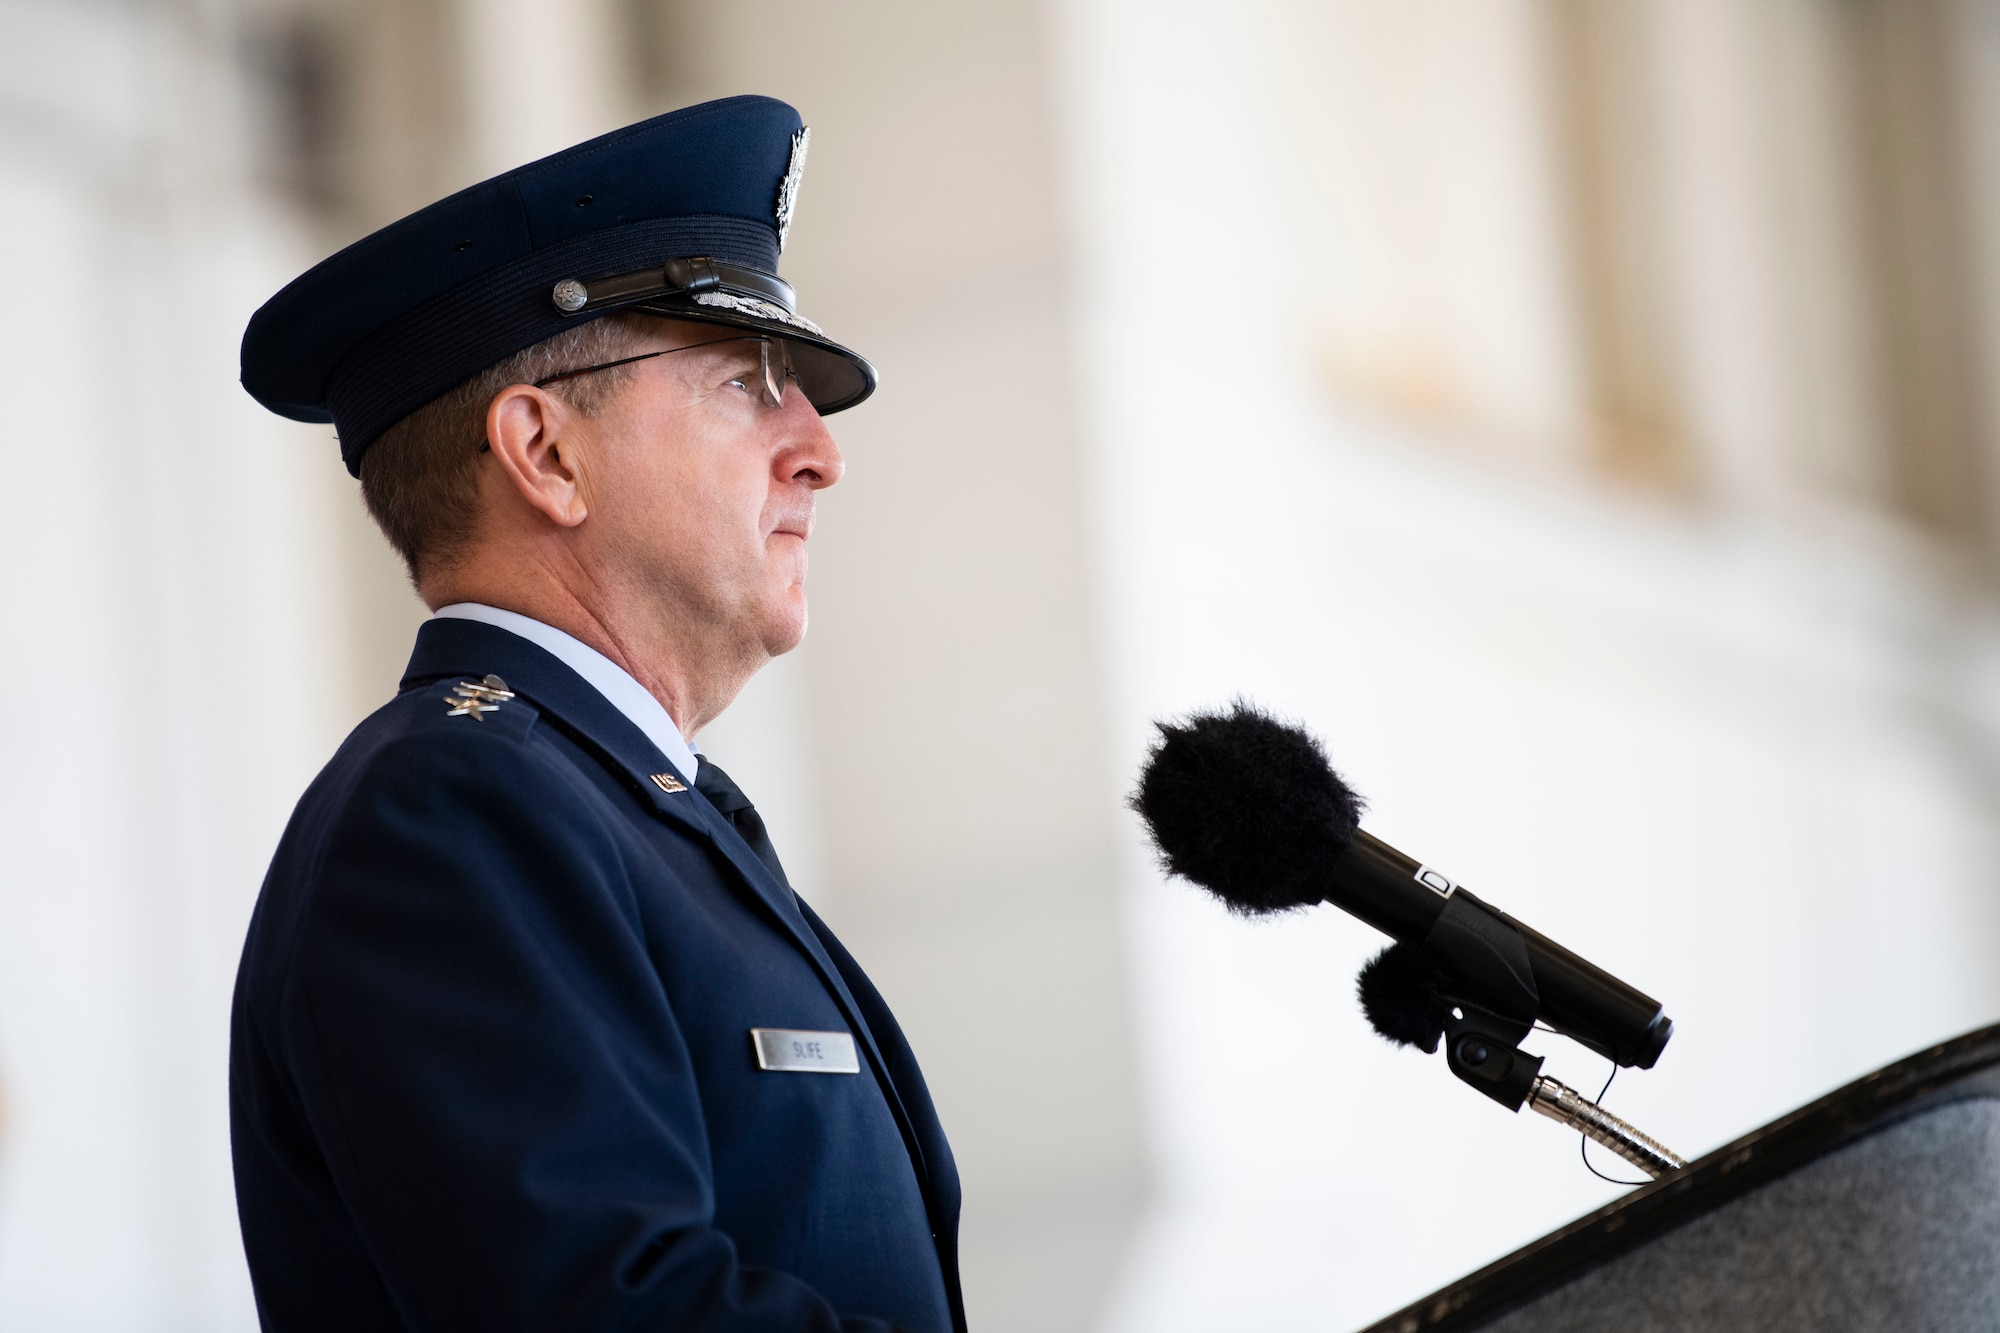 U.S. Air Force Lt. Gen. Jim Slife, commander of Air Force Special Operations Command, delivers a speech during the 1st Special Operations Wing change of command ceremony at Hurlburt Field, Florida, July 21, 2022